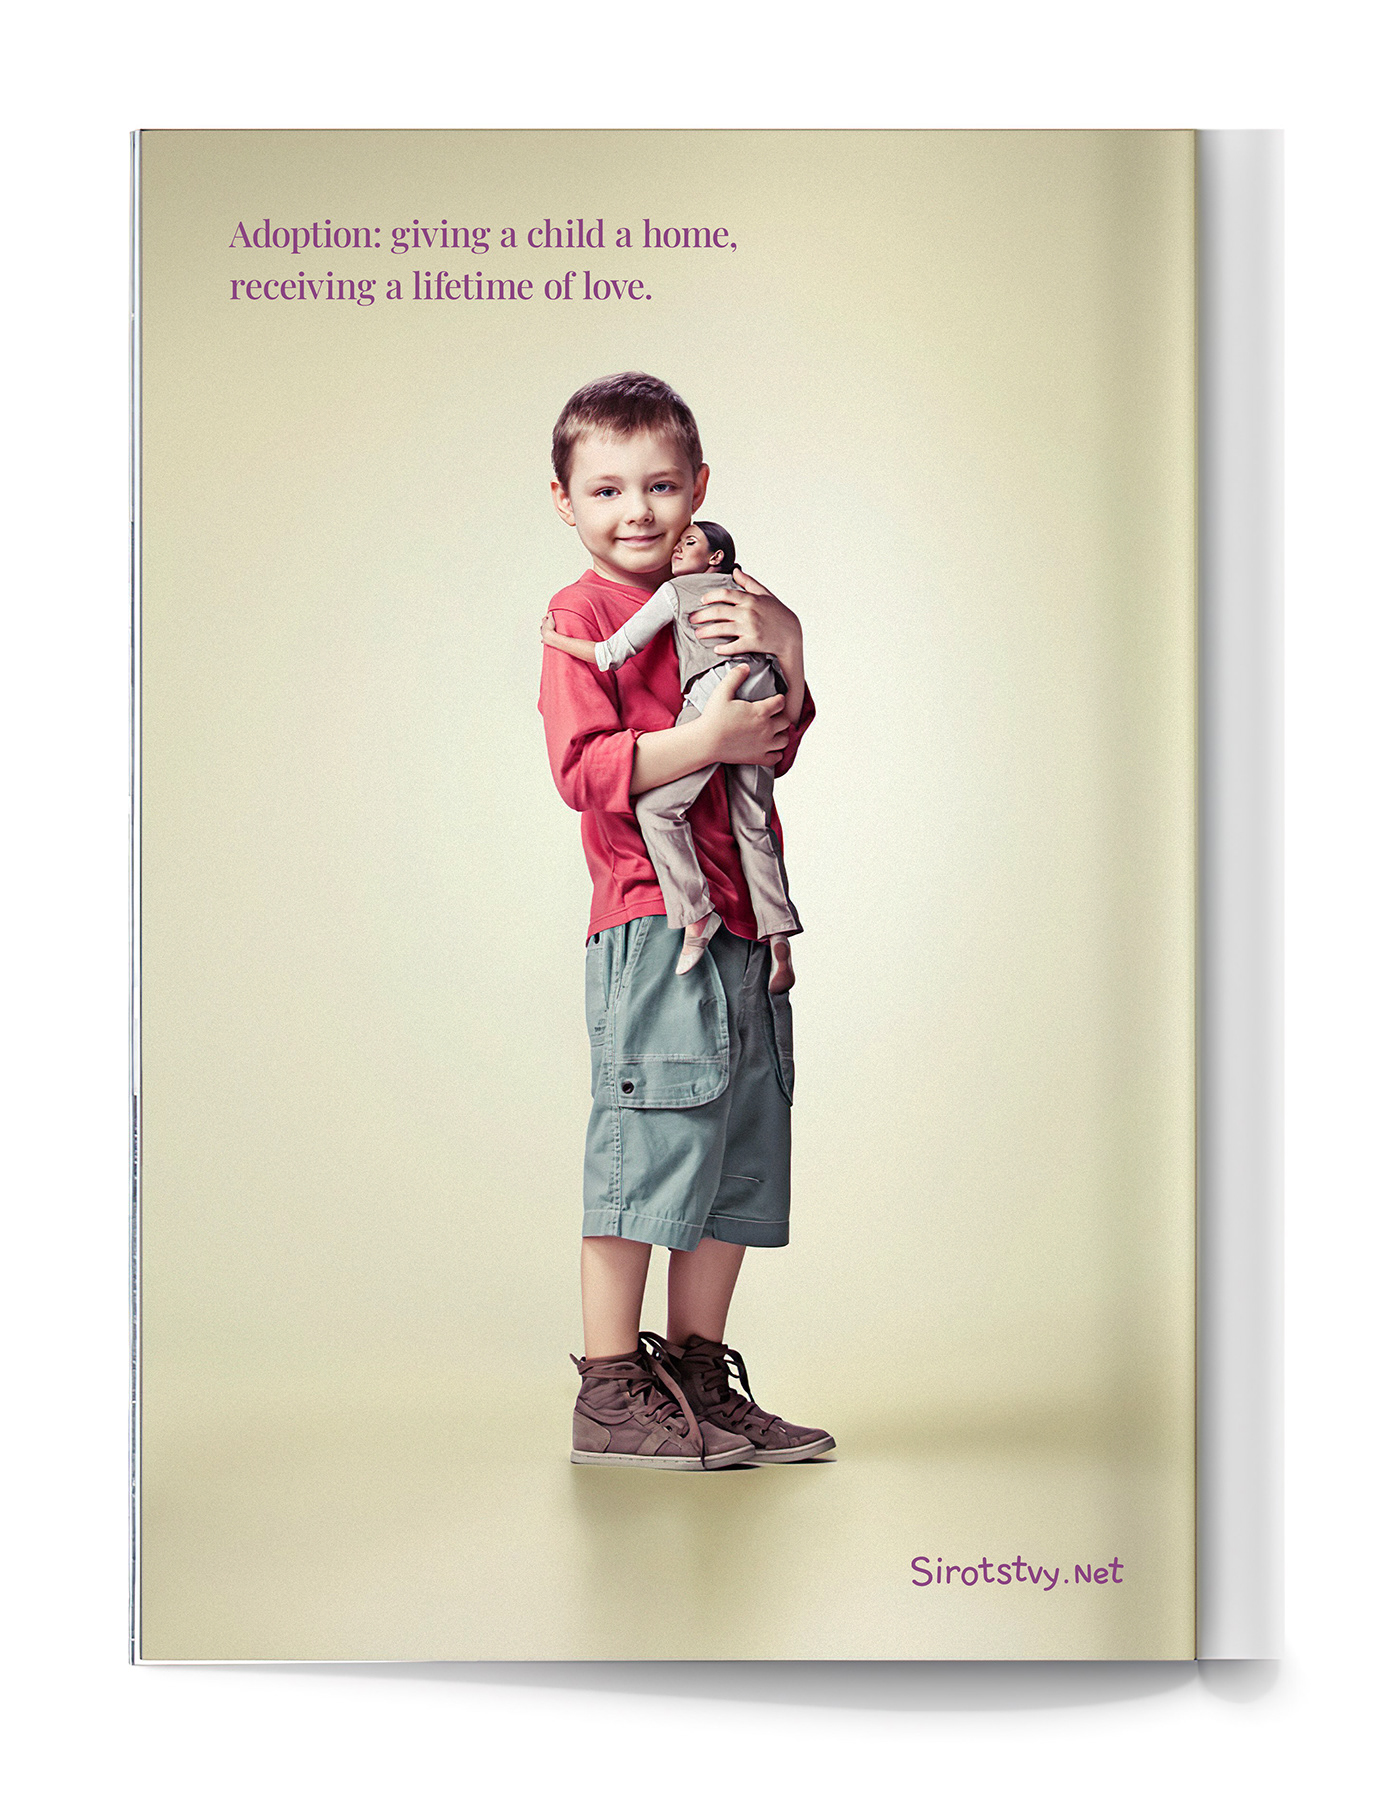 adoption ads Advertising  art direction  campaign Photography  photoshoot print print advertising social advertising